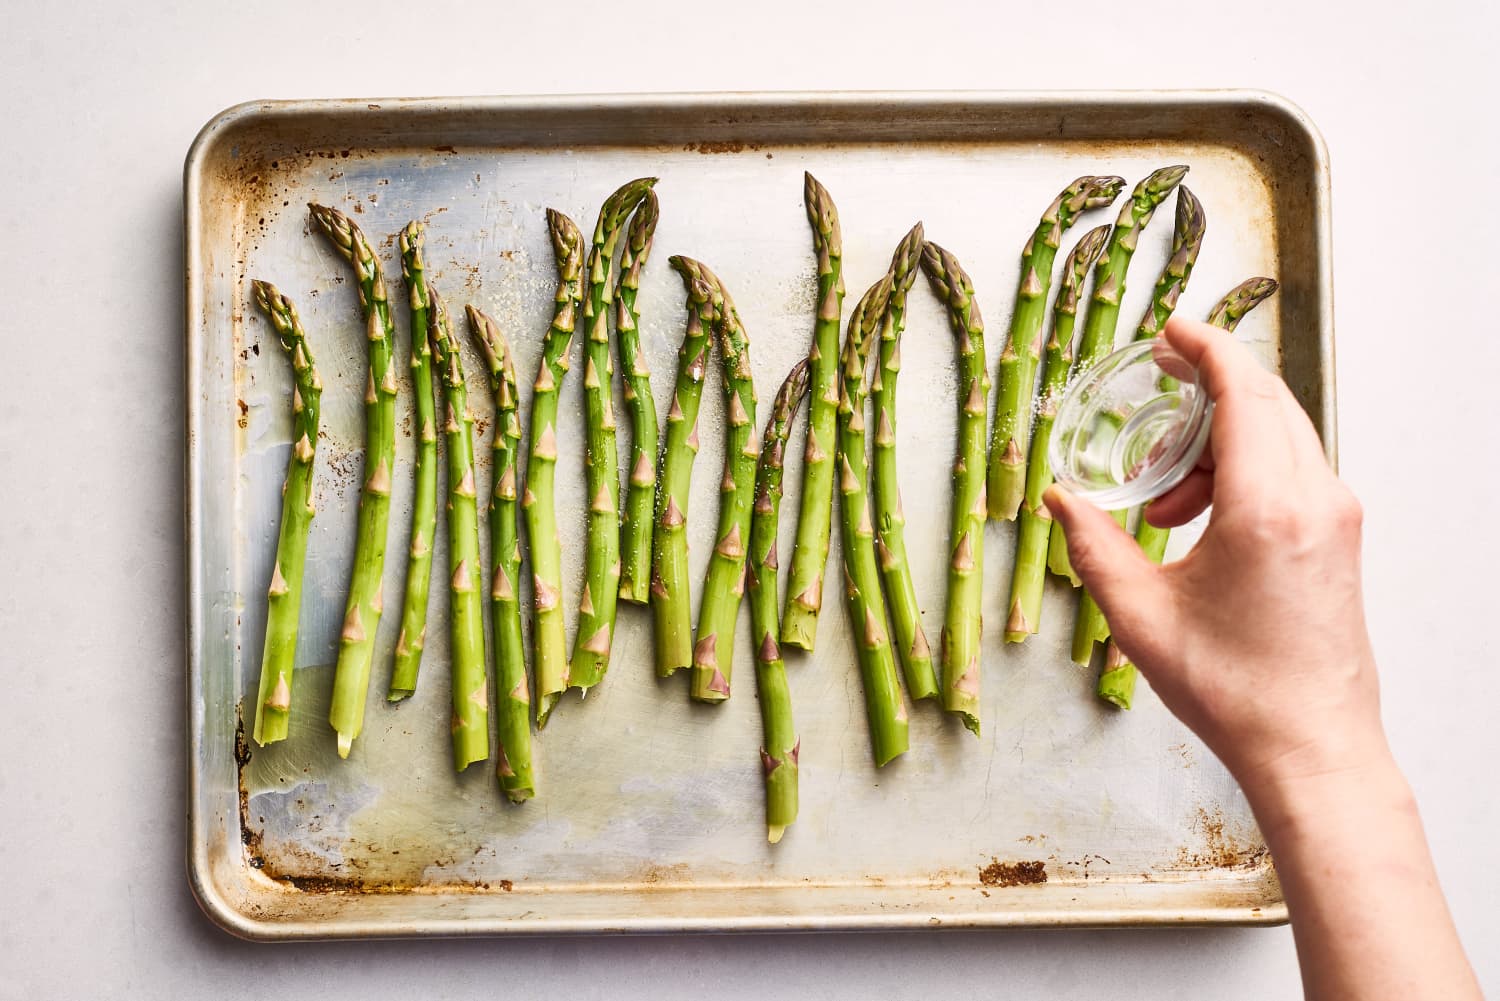 The Game-Changing Tool That Makes Peeling Asparagus a Breeze